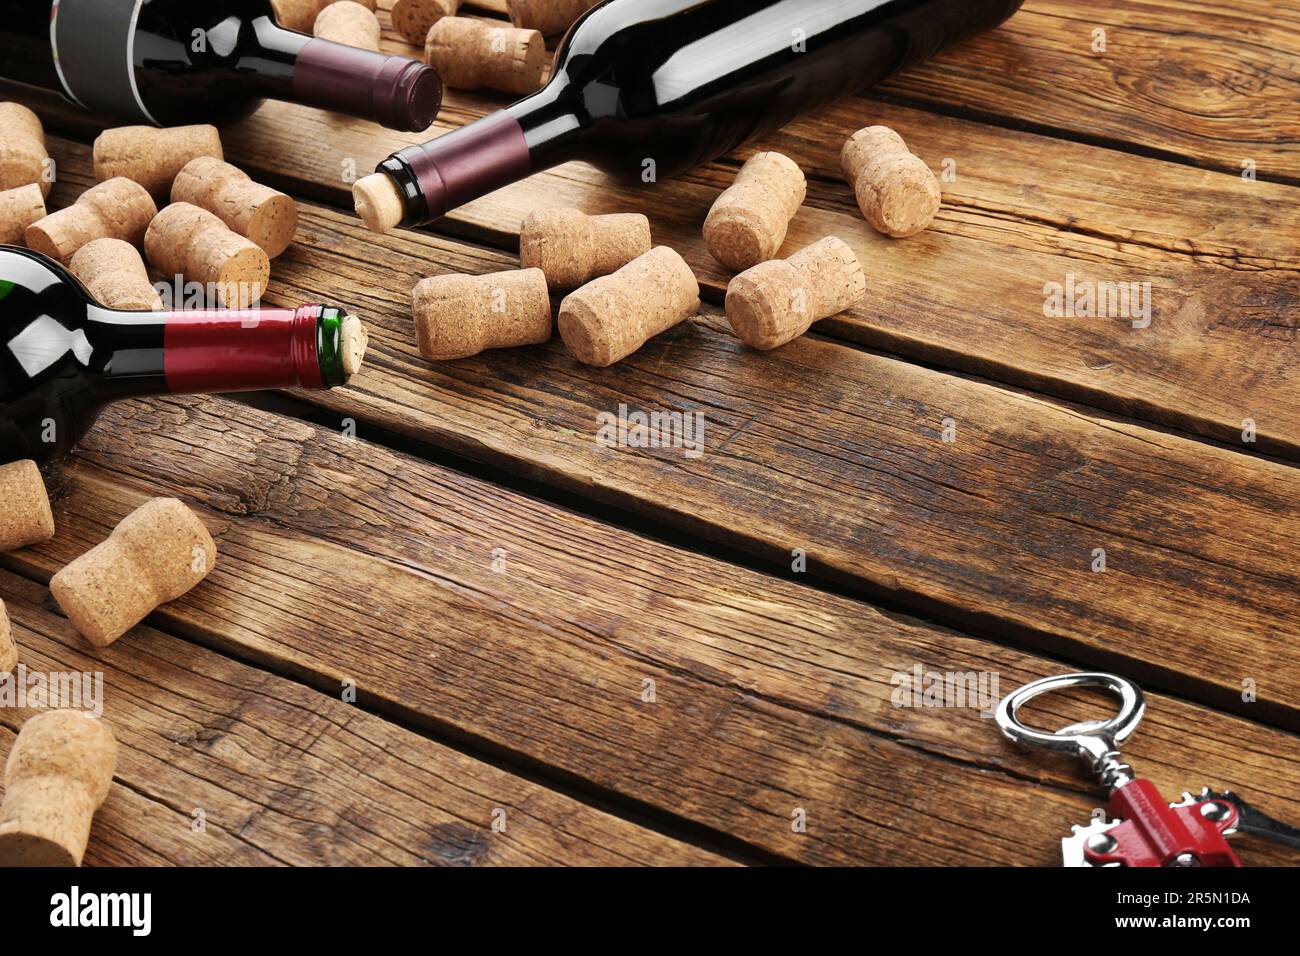 Wine container full of corks Stock Photo - Alamy